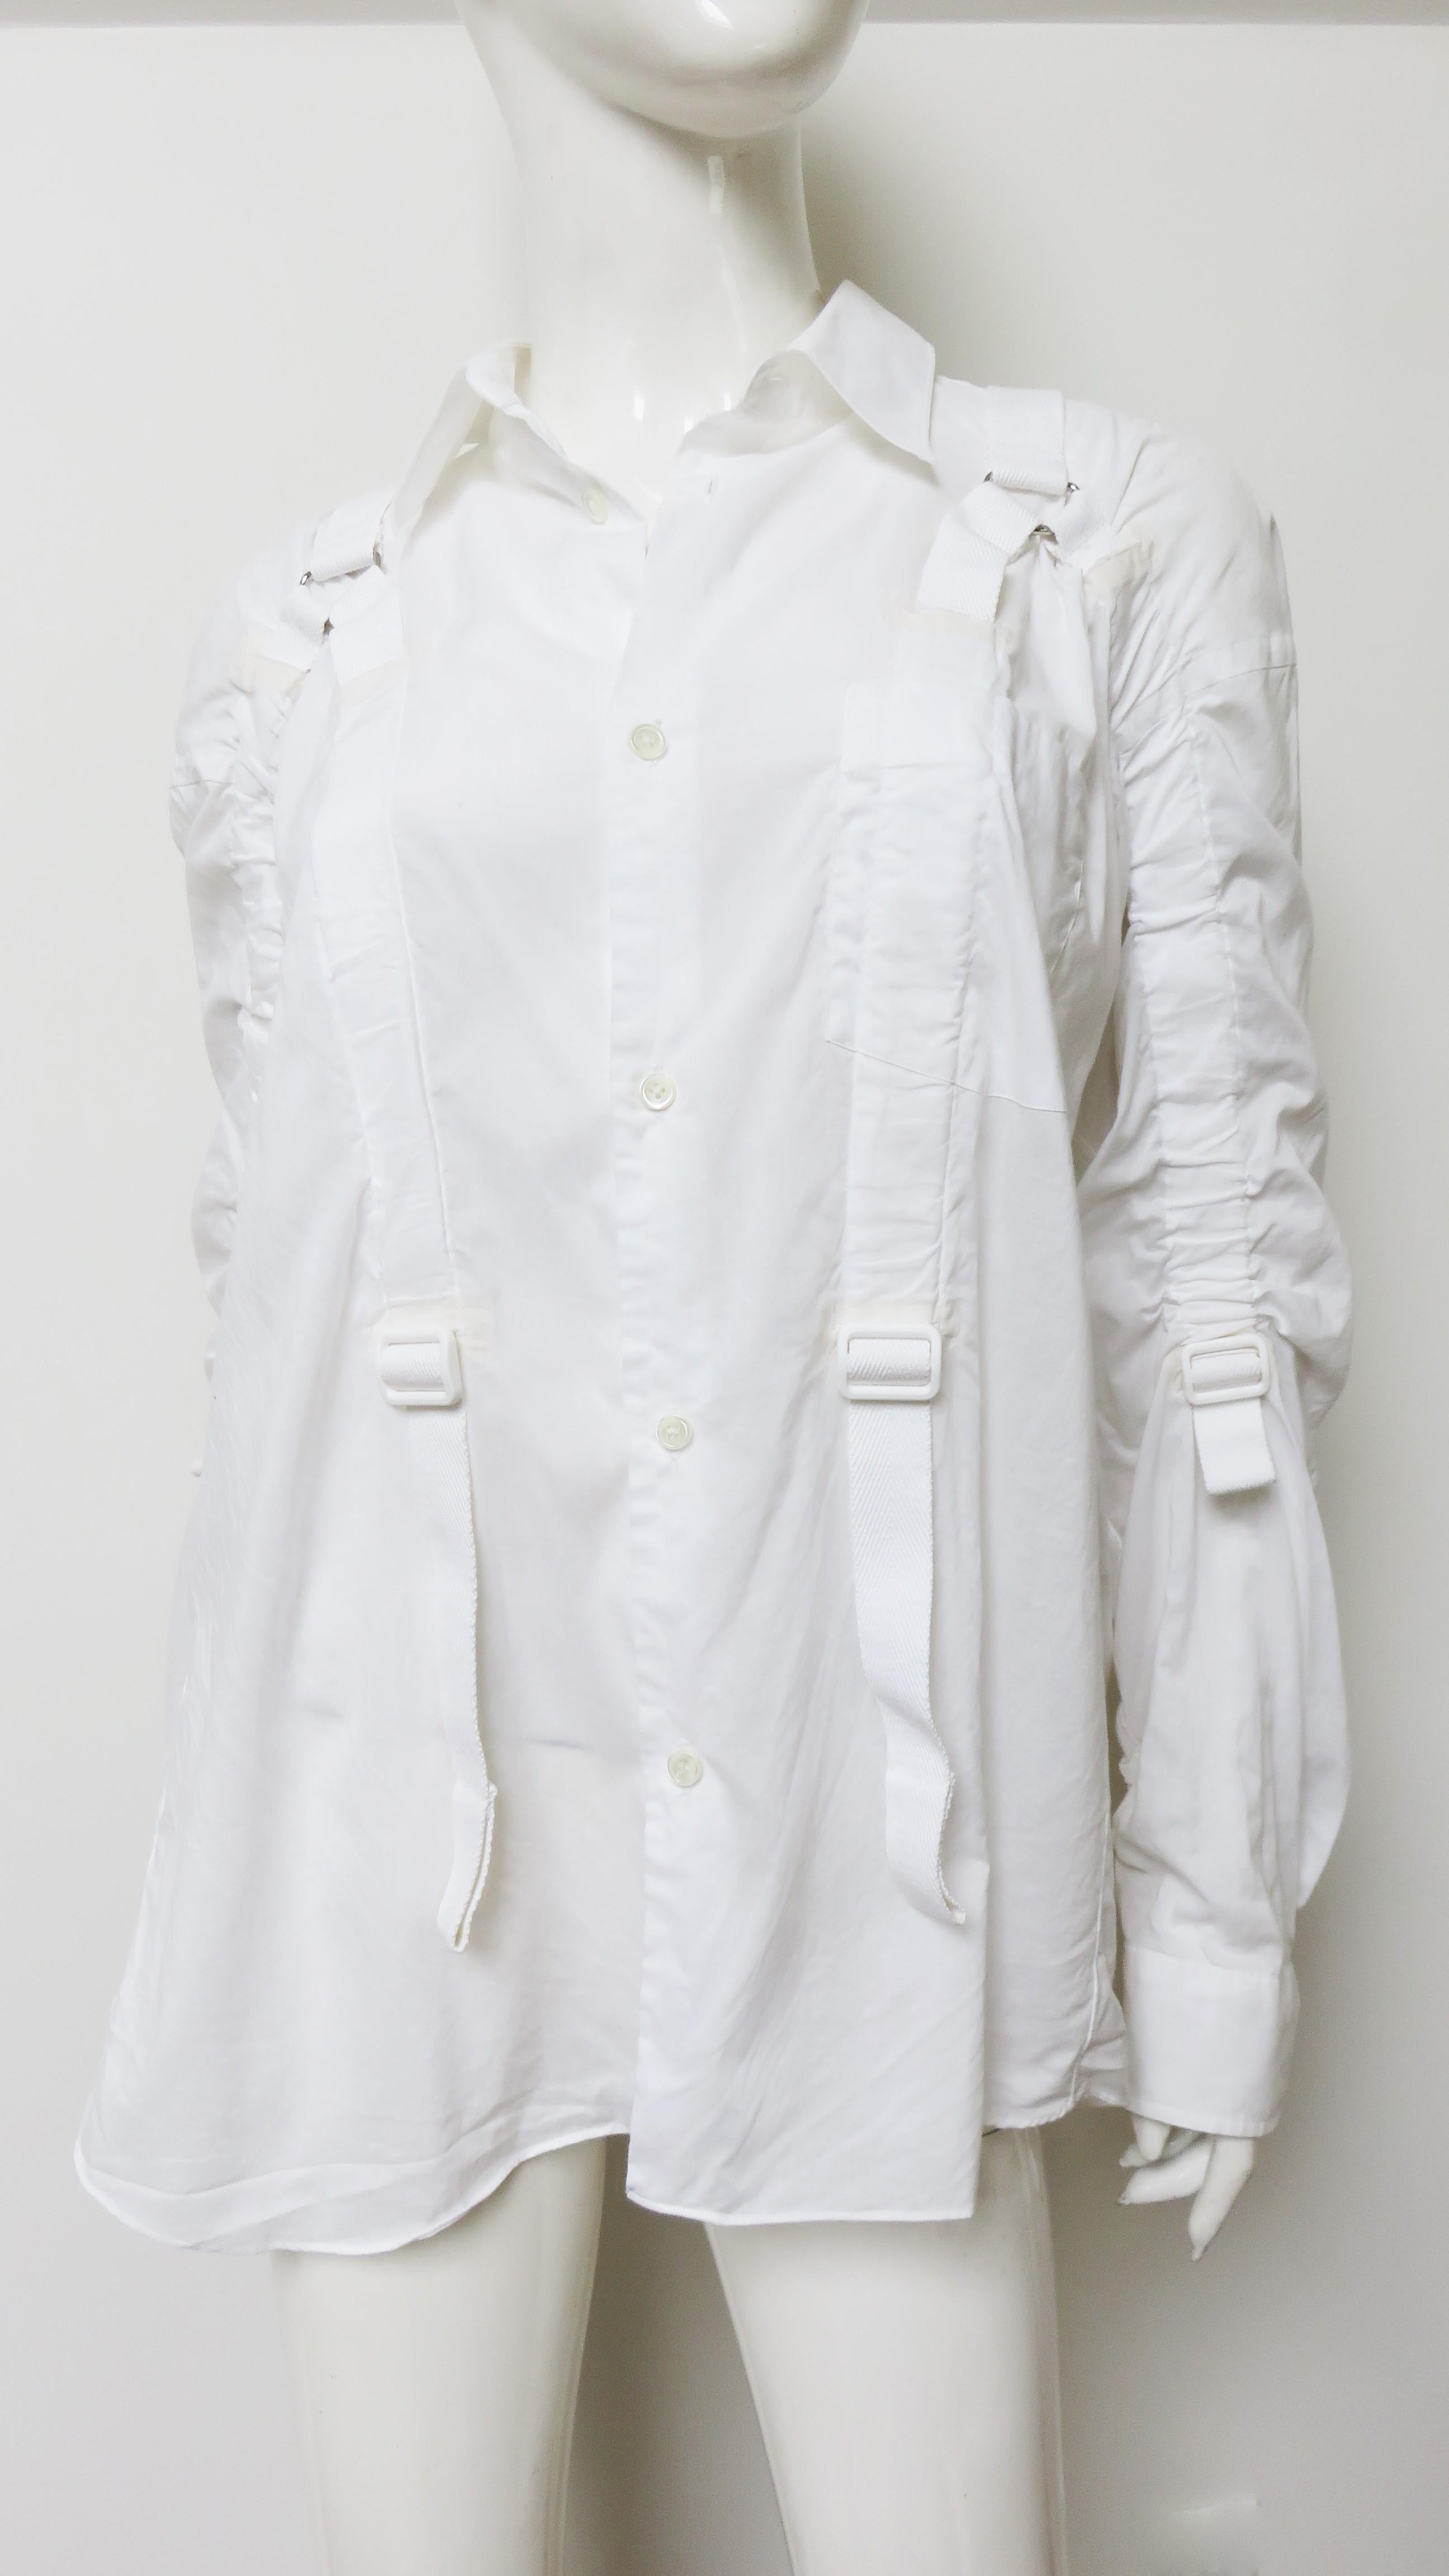 A fabulous fine white cotton shirt from Junya Watanabe for Comme des Garcons (CDG).  It has a shirt collar, long cuff sleeves and mother of pearl buttons up the front. The back fuller than the front has an opening under the yoke with a full gathered